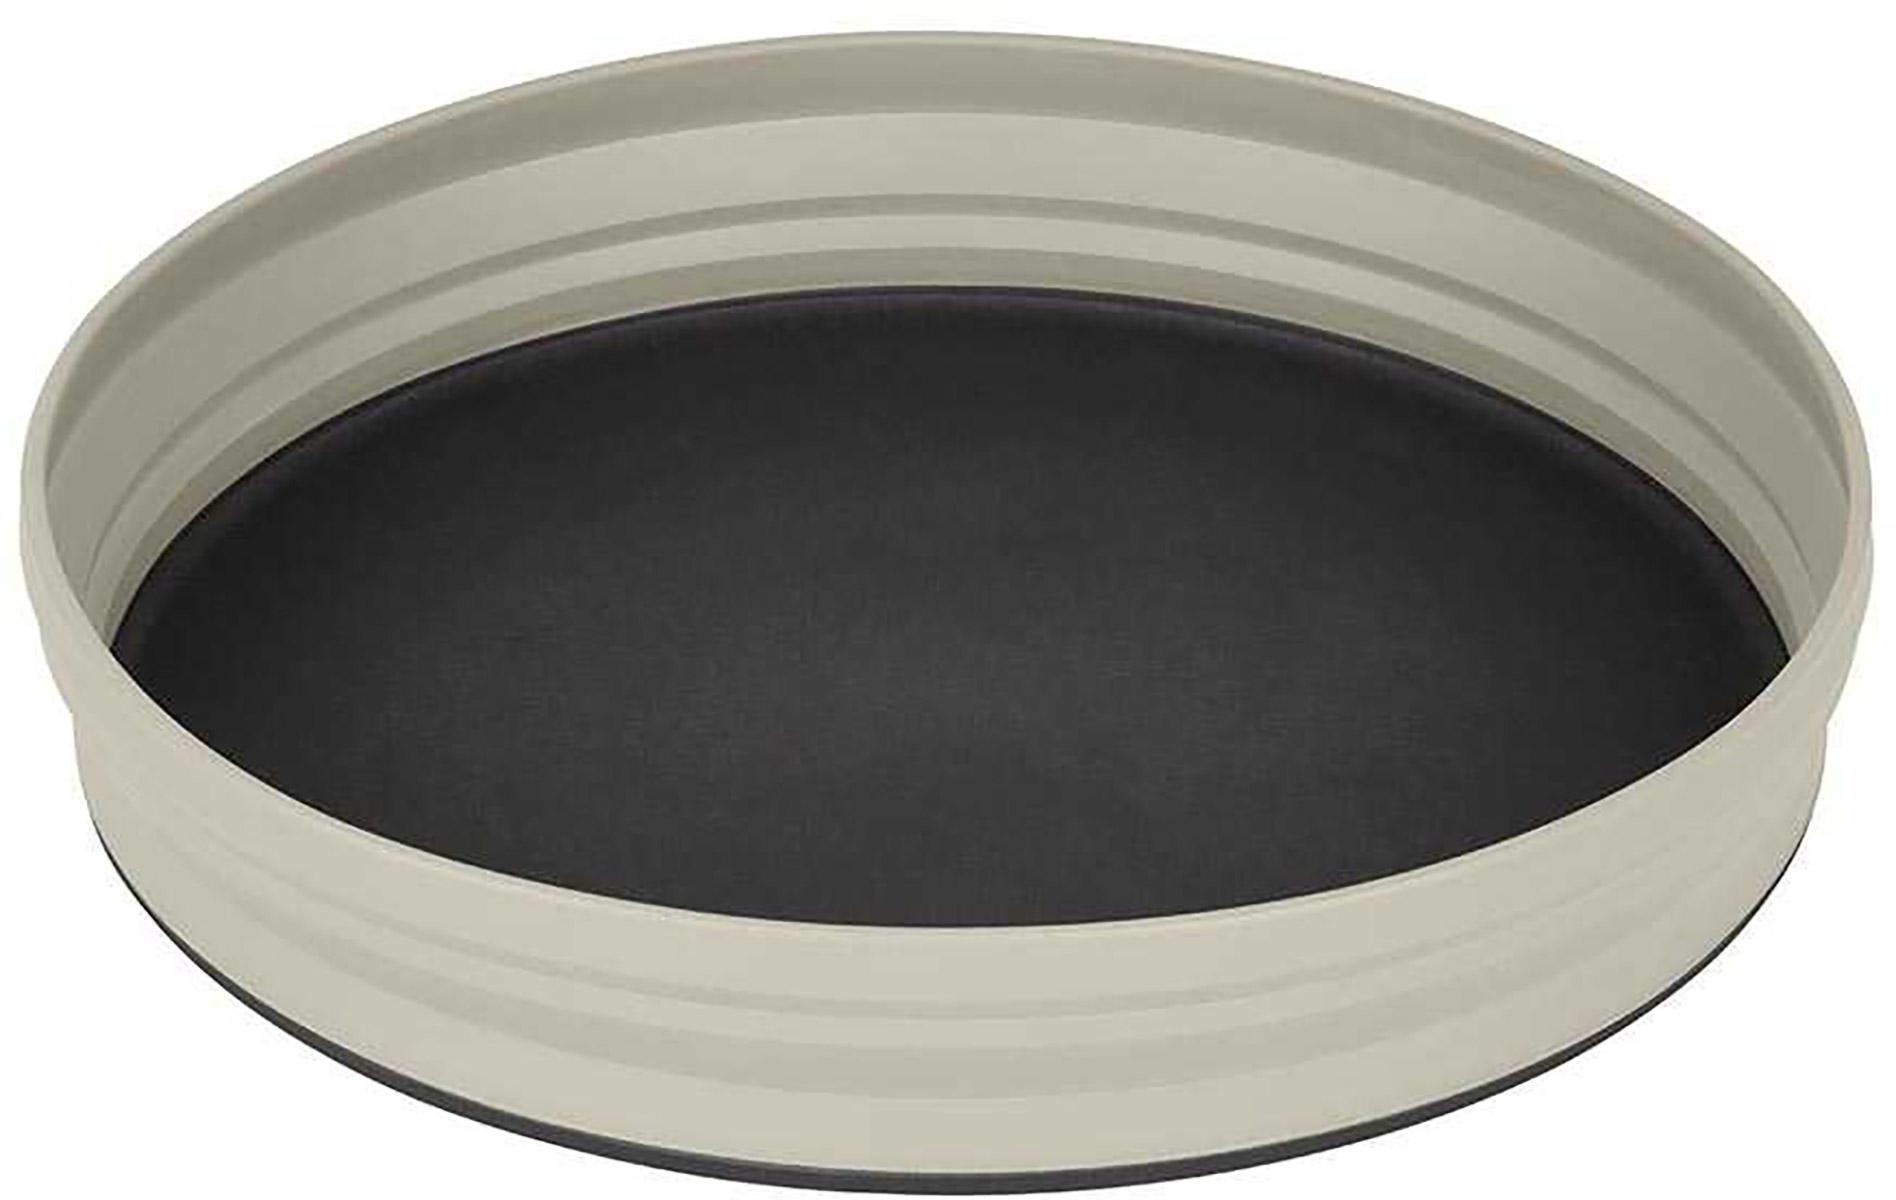 Sea To Summit X-plate Collapsible Plate - Sand